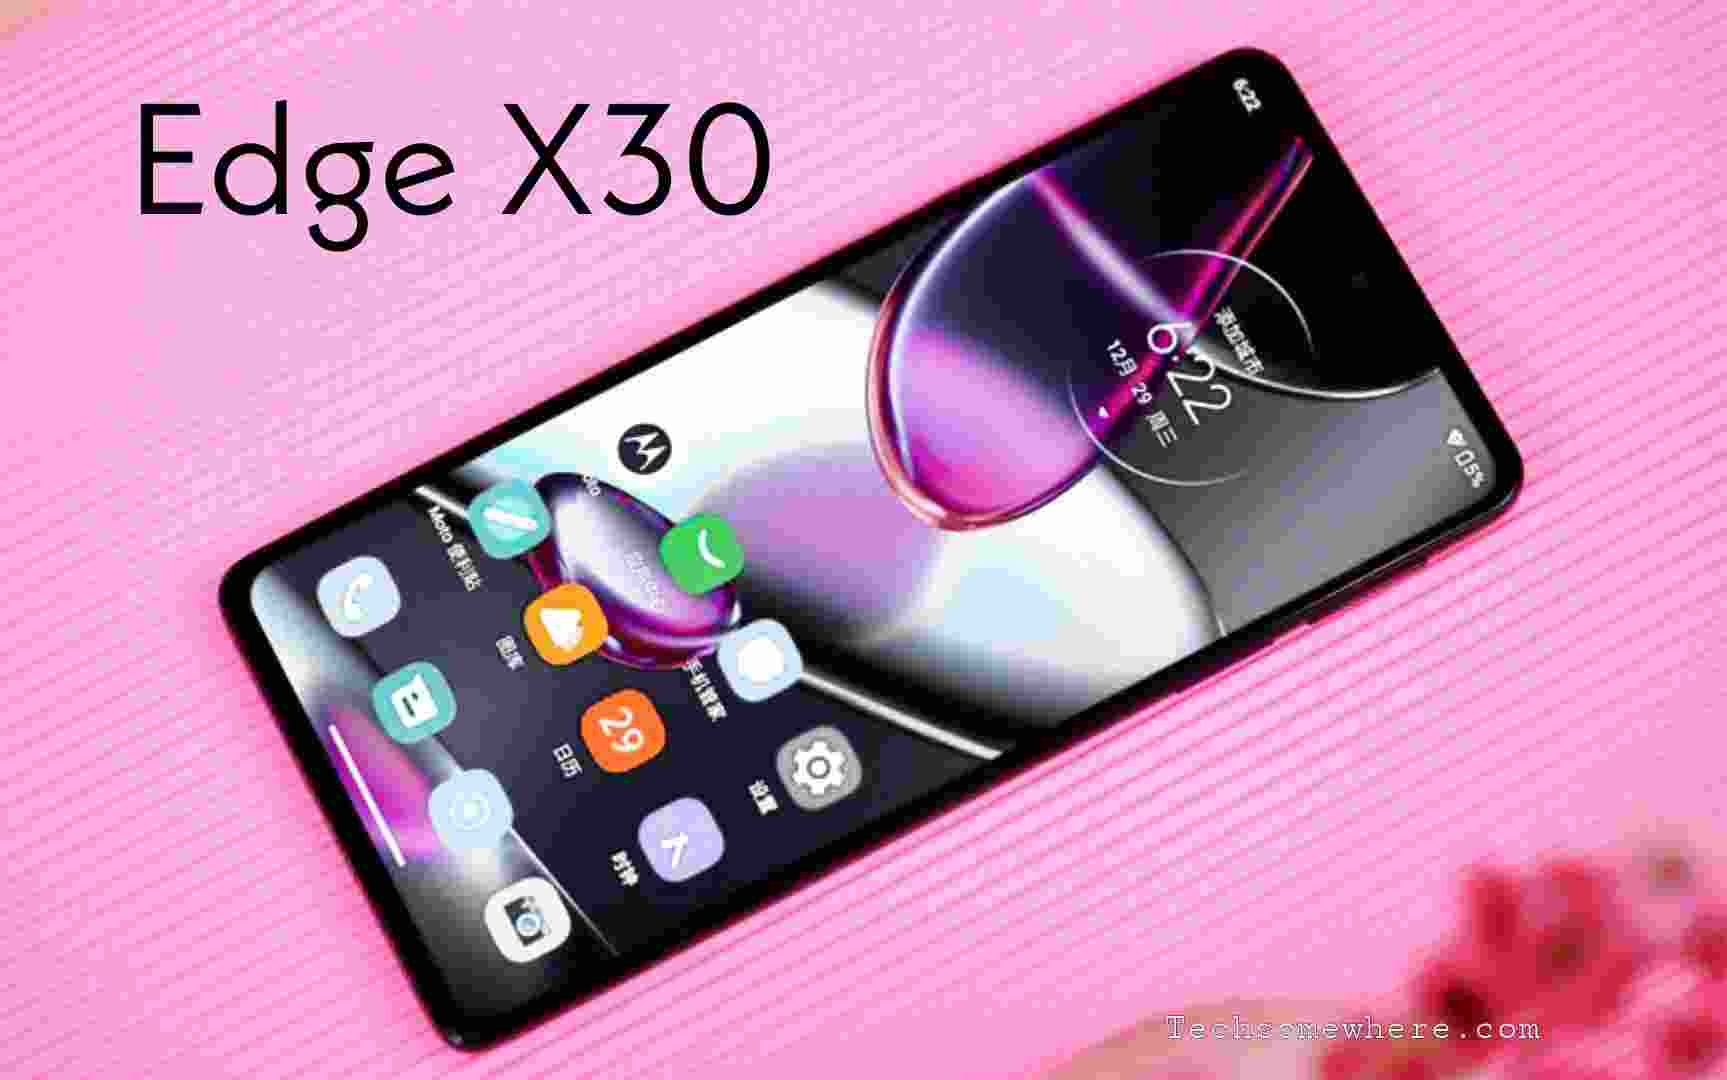 Presenting Motorola Edge X30 Price, Cool Features And Release Date!